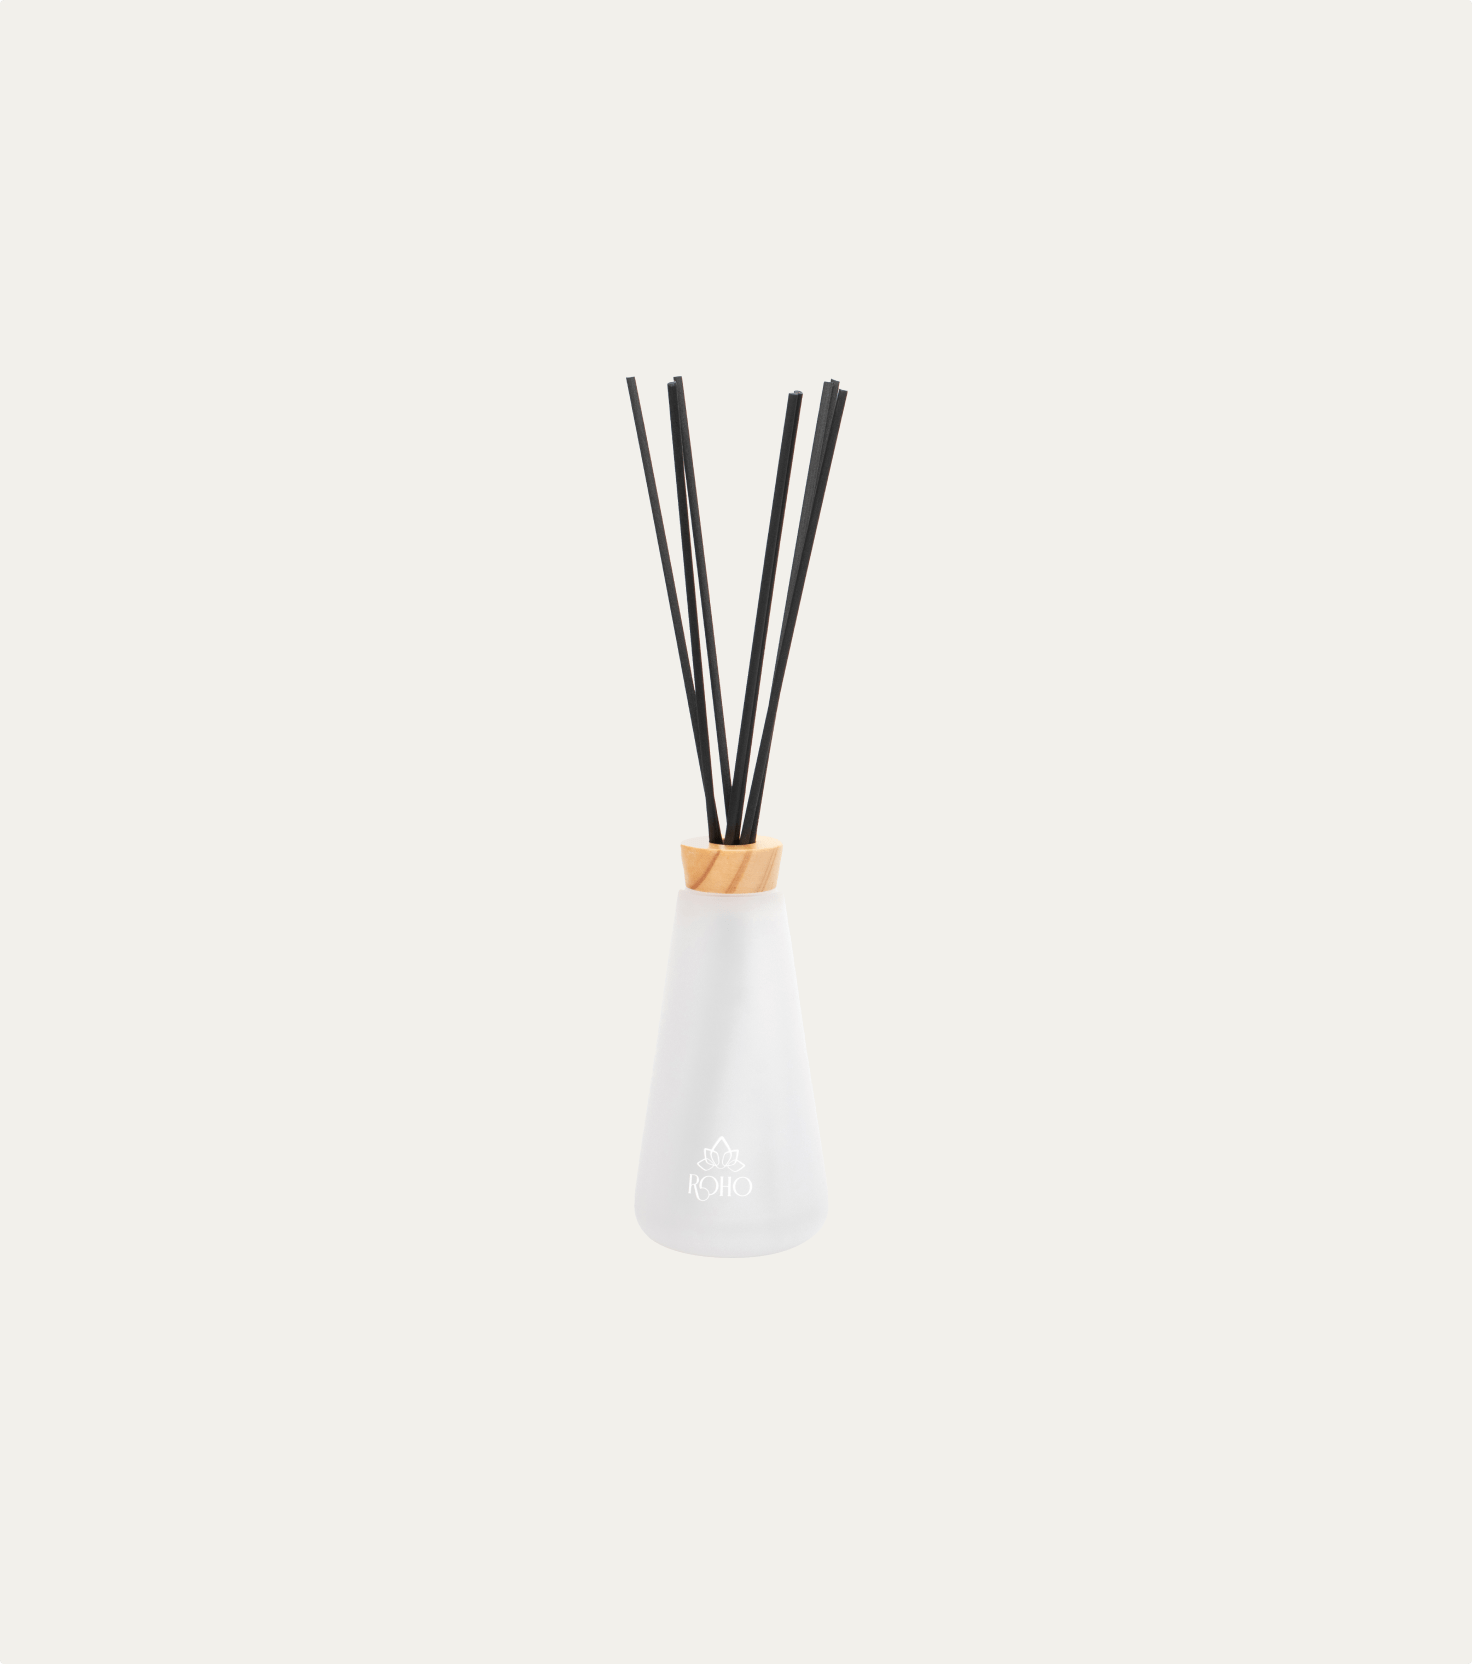 Cotton Field Reed Diffuser - ROHO AIRDECO